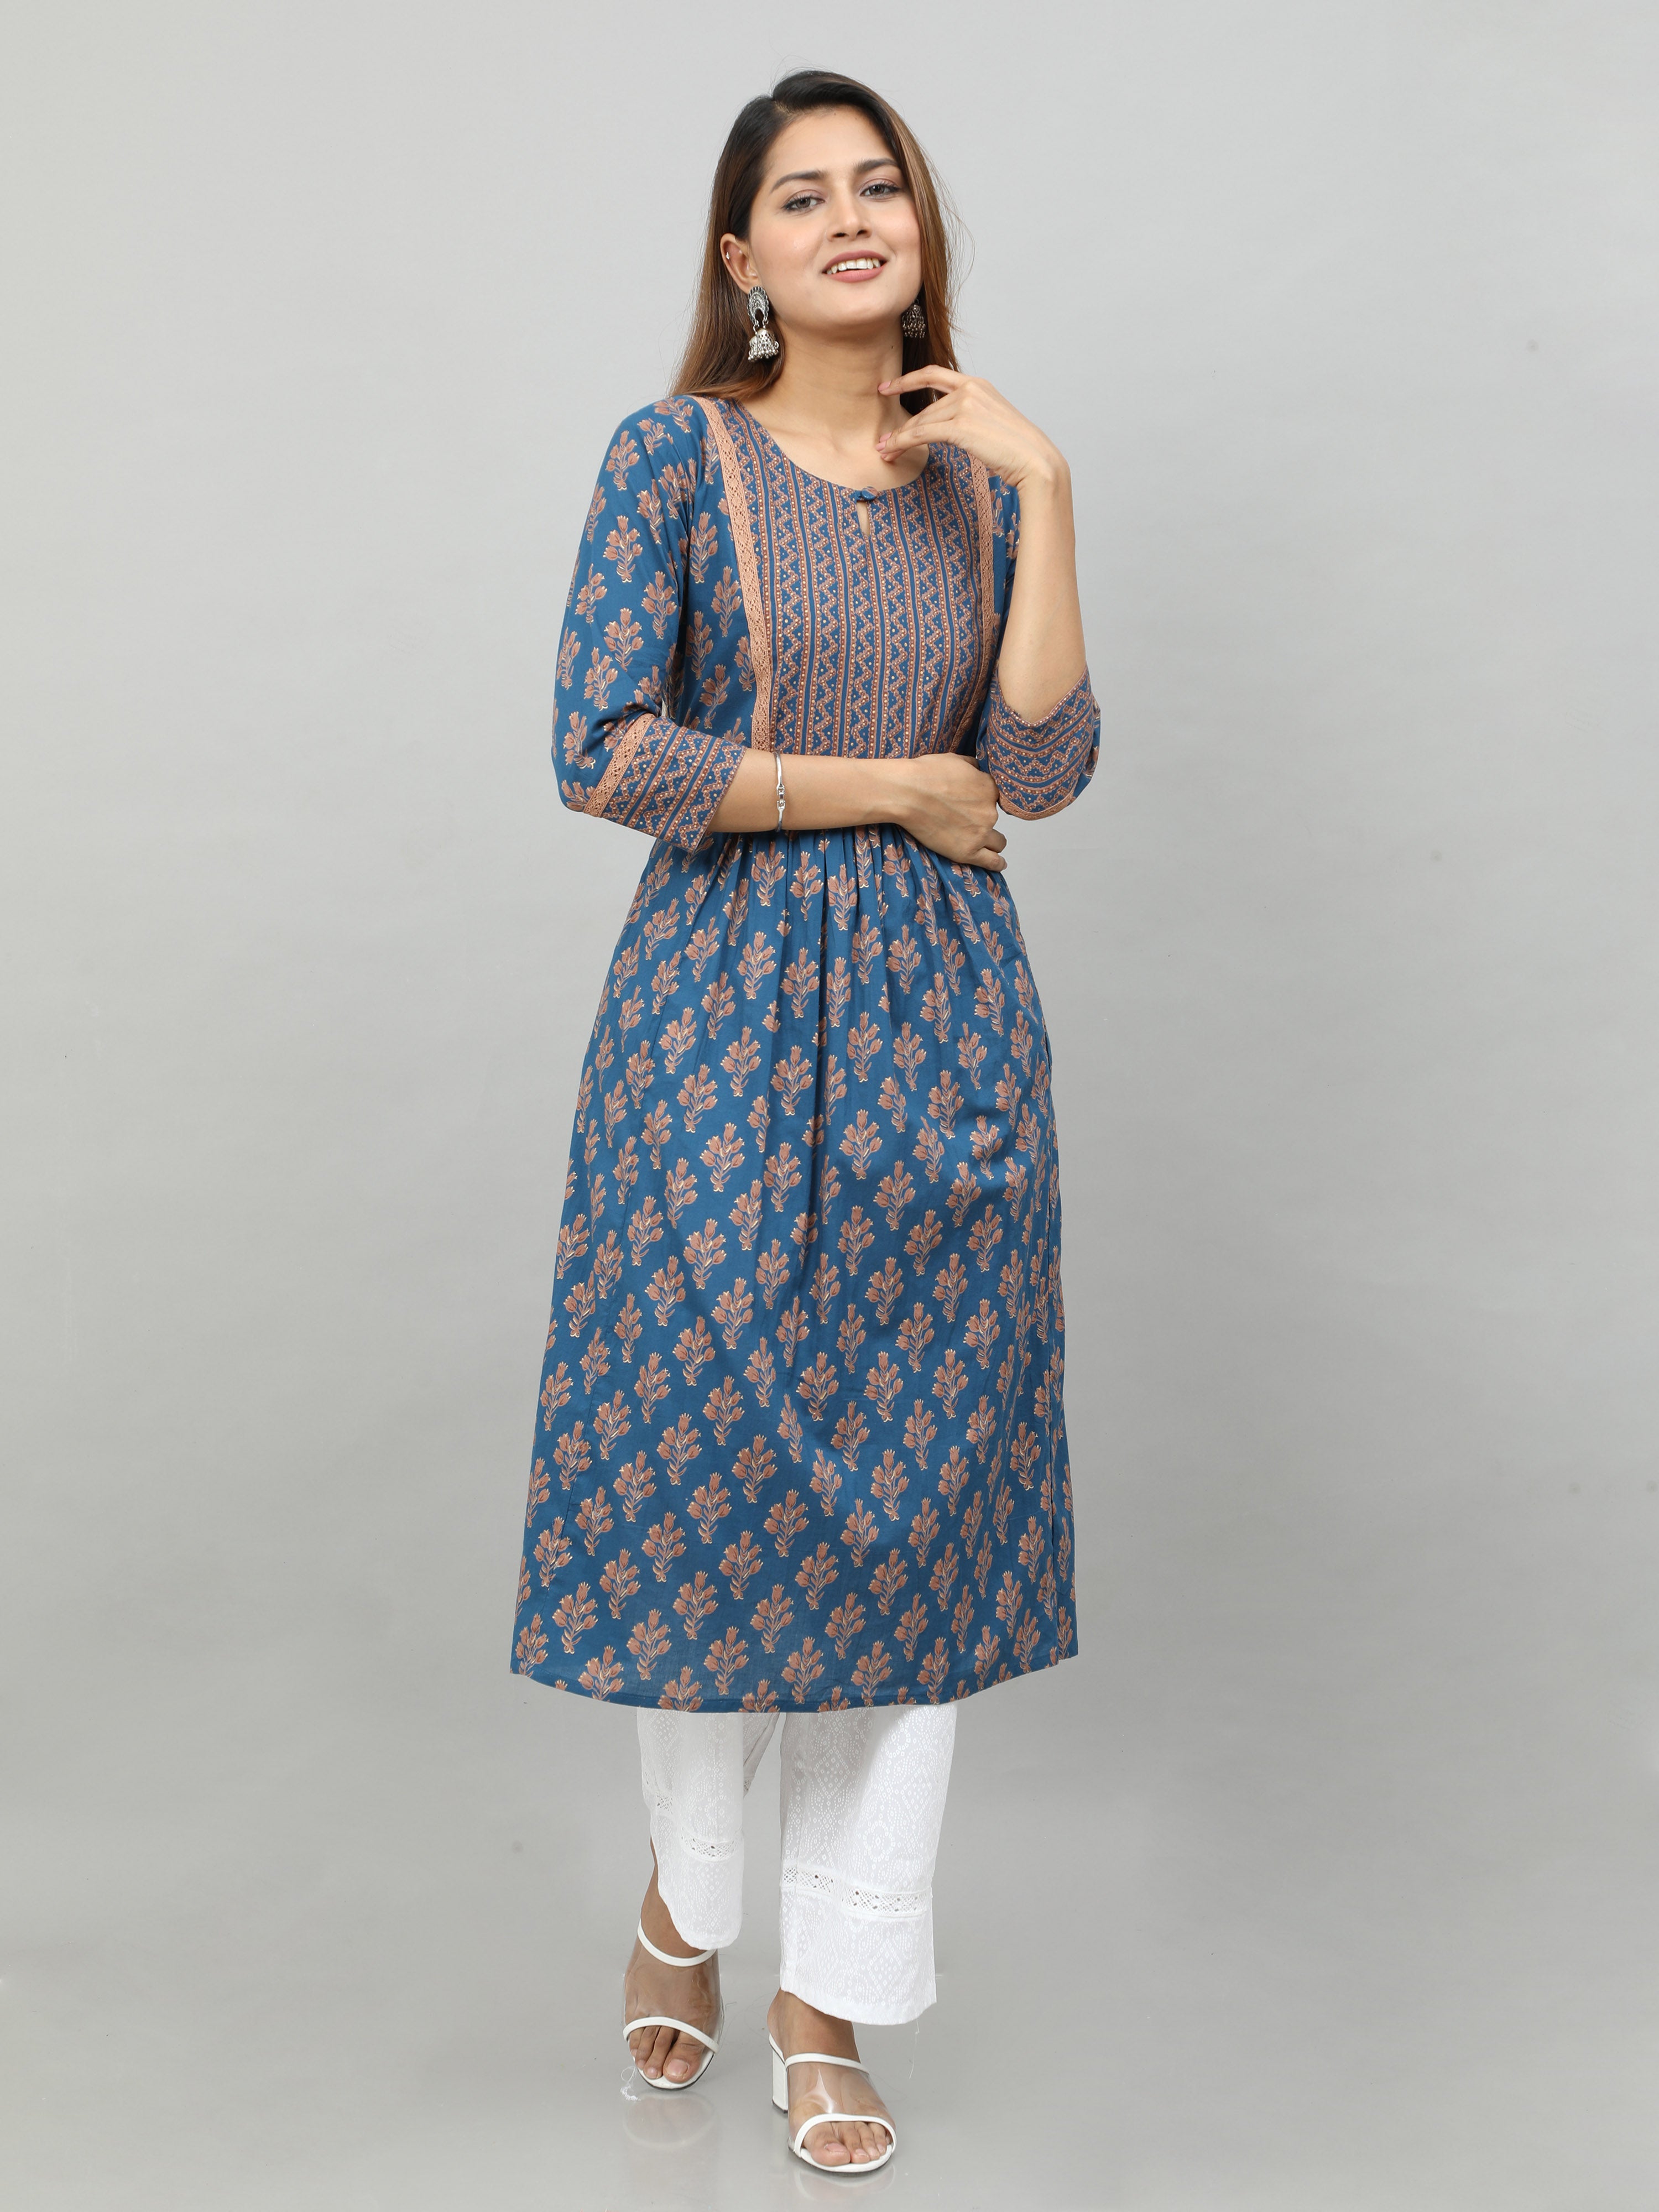 Pure Cotton Blue and White Hand Block Print Floral Print Kurti for women -  Bella Pinks - 4187645